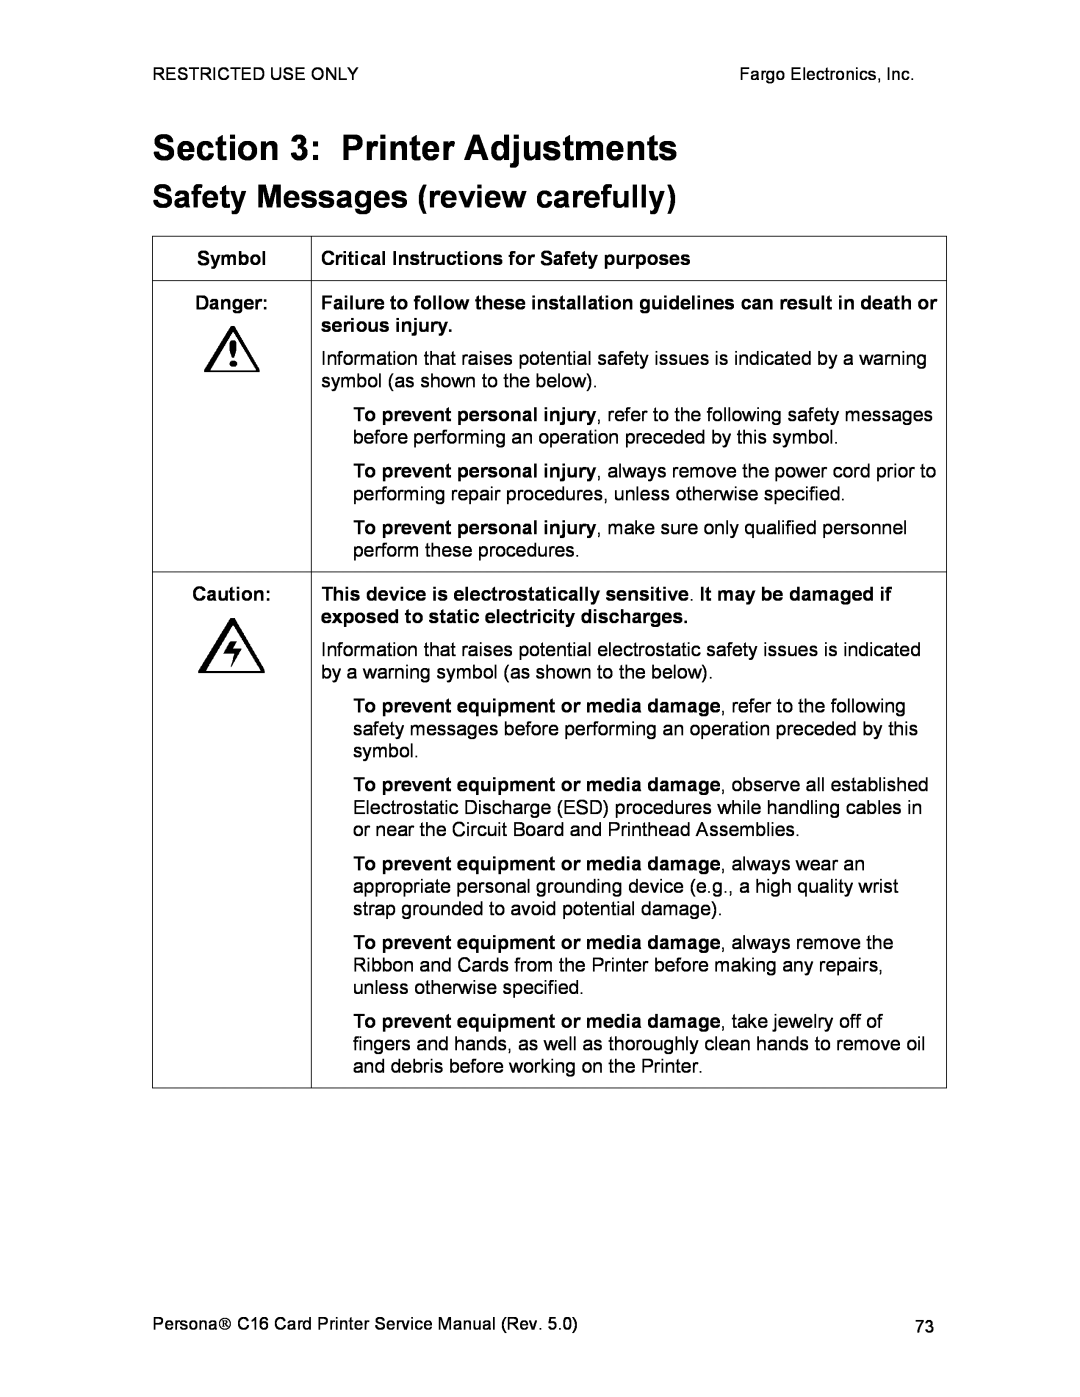 FARGO electronic C16 service manual Printer Adjustments, Safety Messages review carefully 